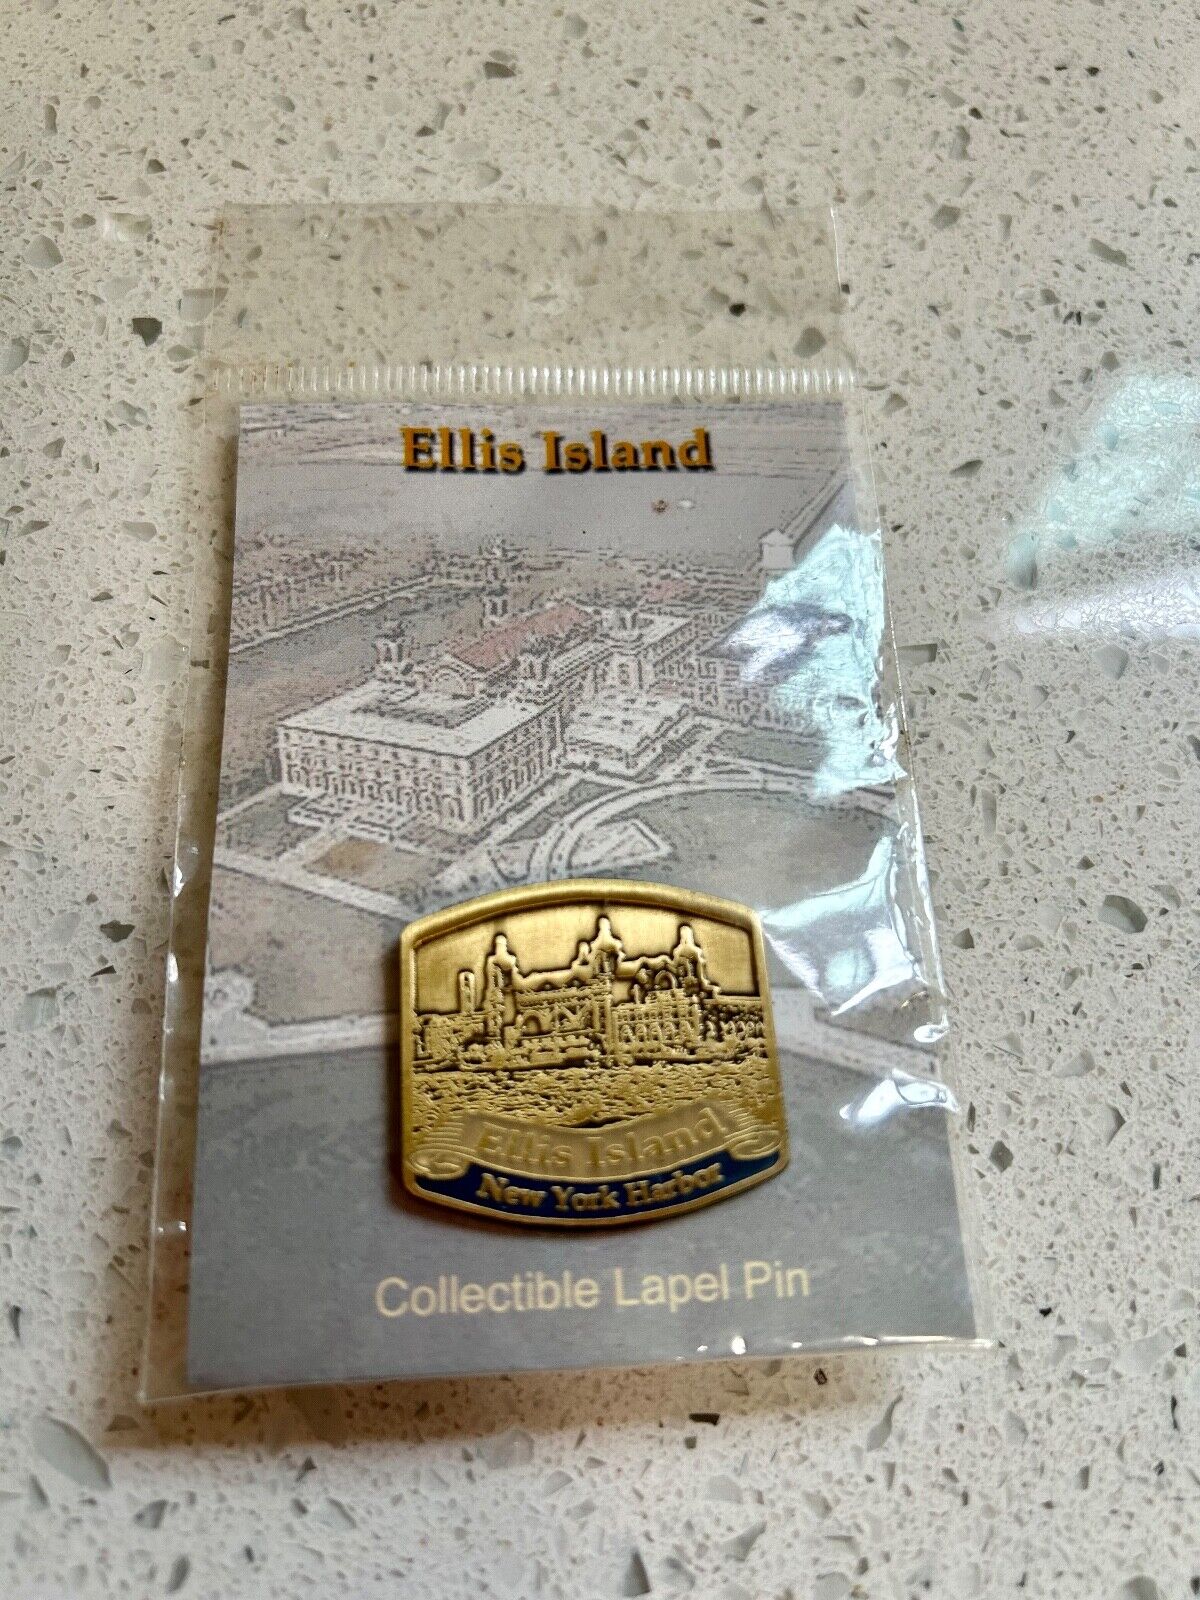 Ellis Island New York Harbor Collectible Lapel Pin - In Package Unopened - NICE